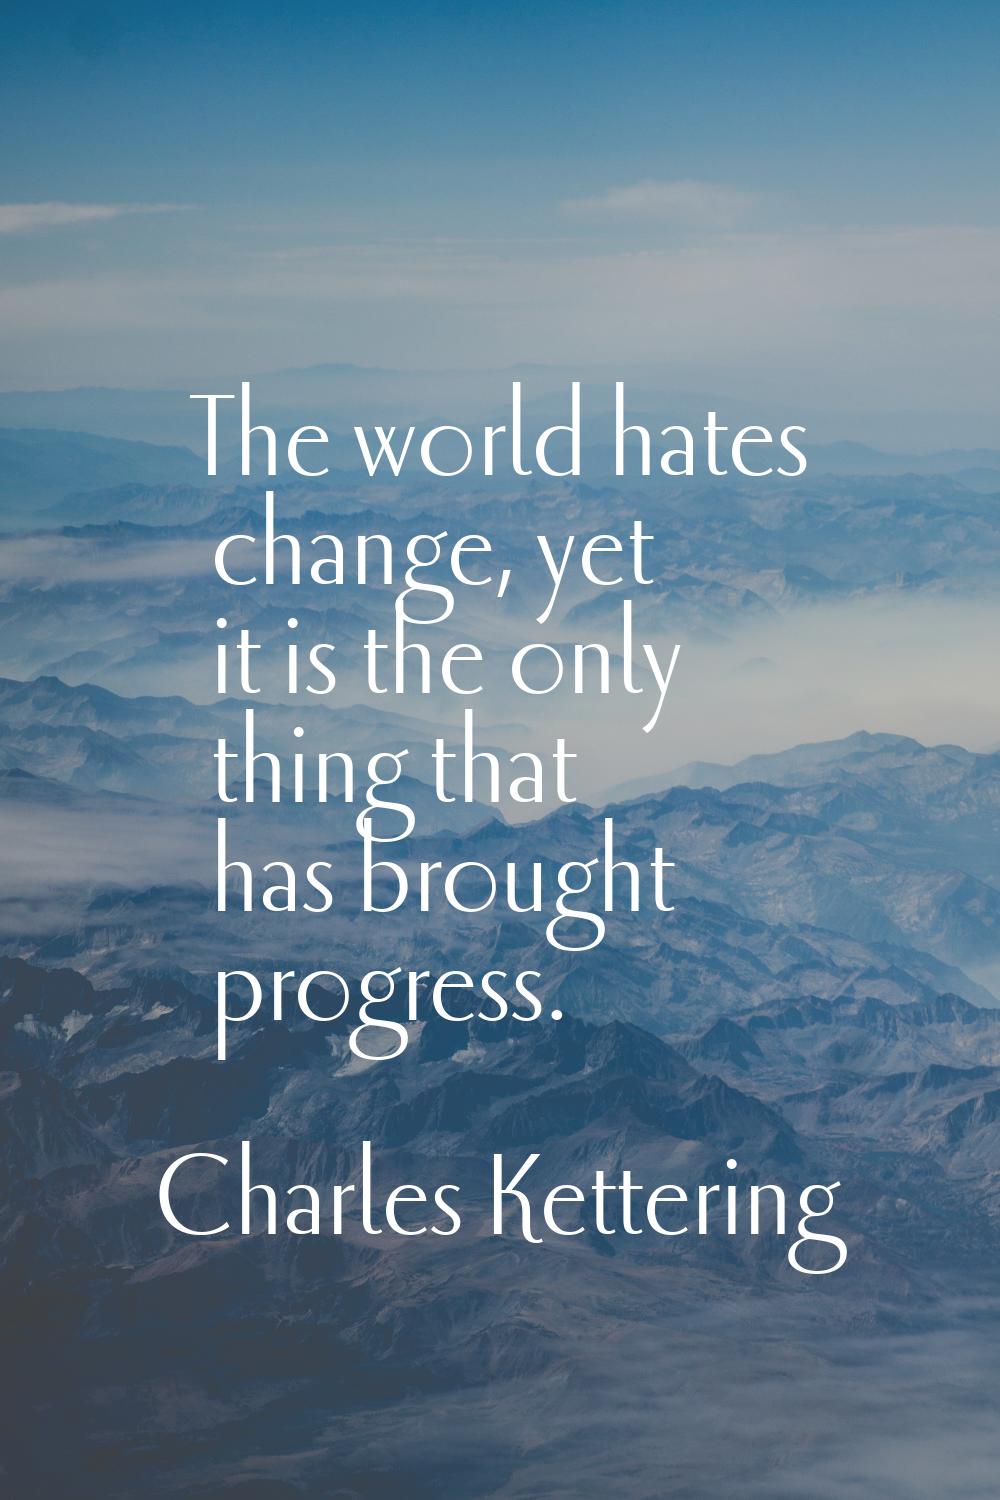 The world hates change, yet it is the only thing that has brought progress.